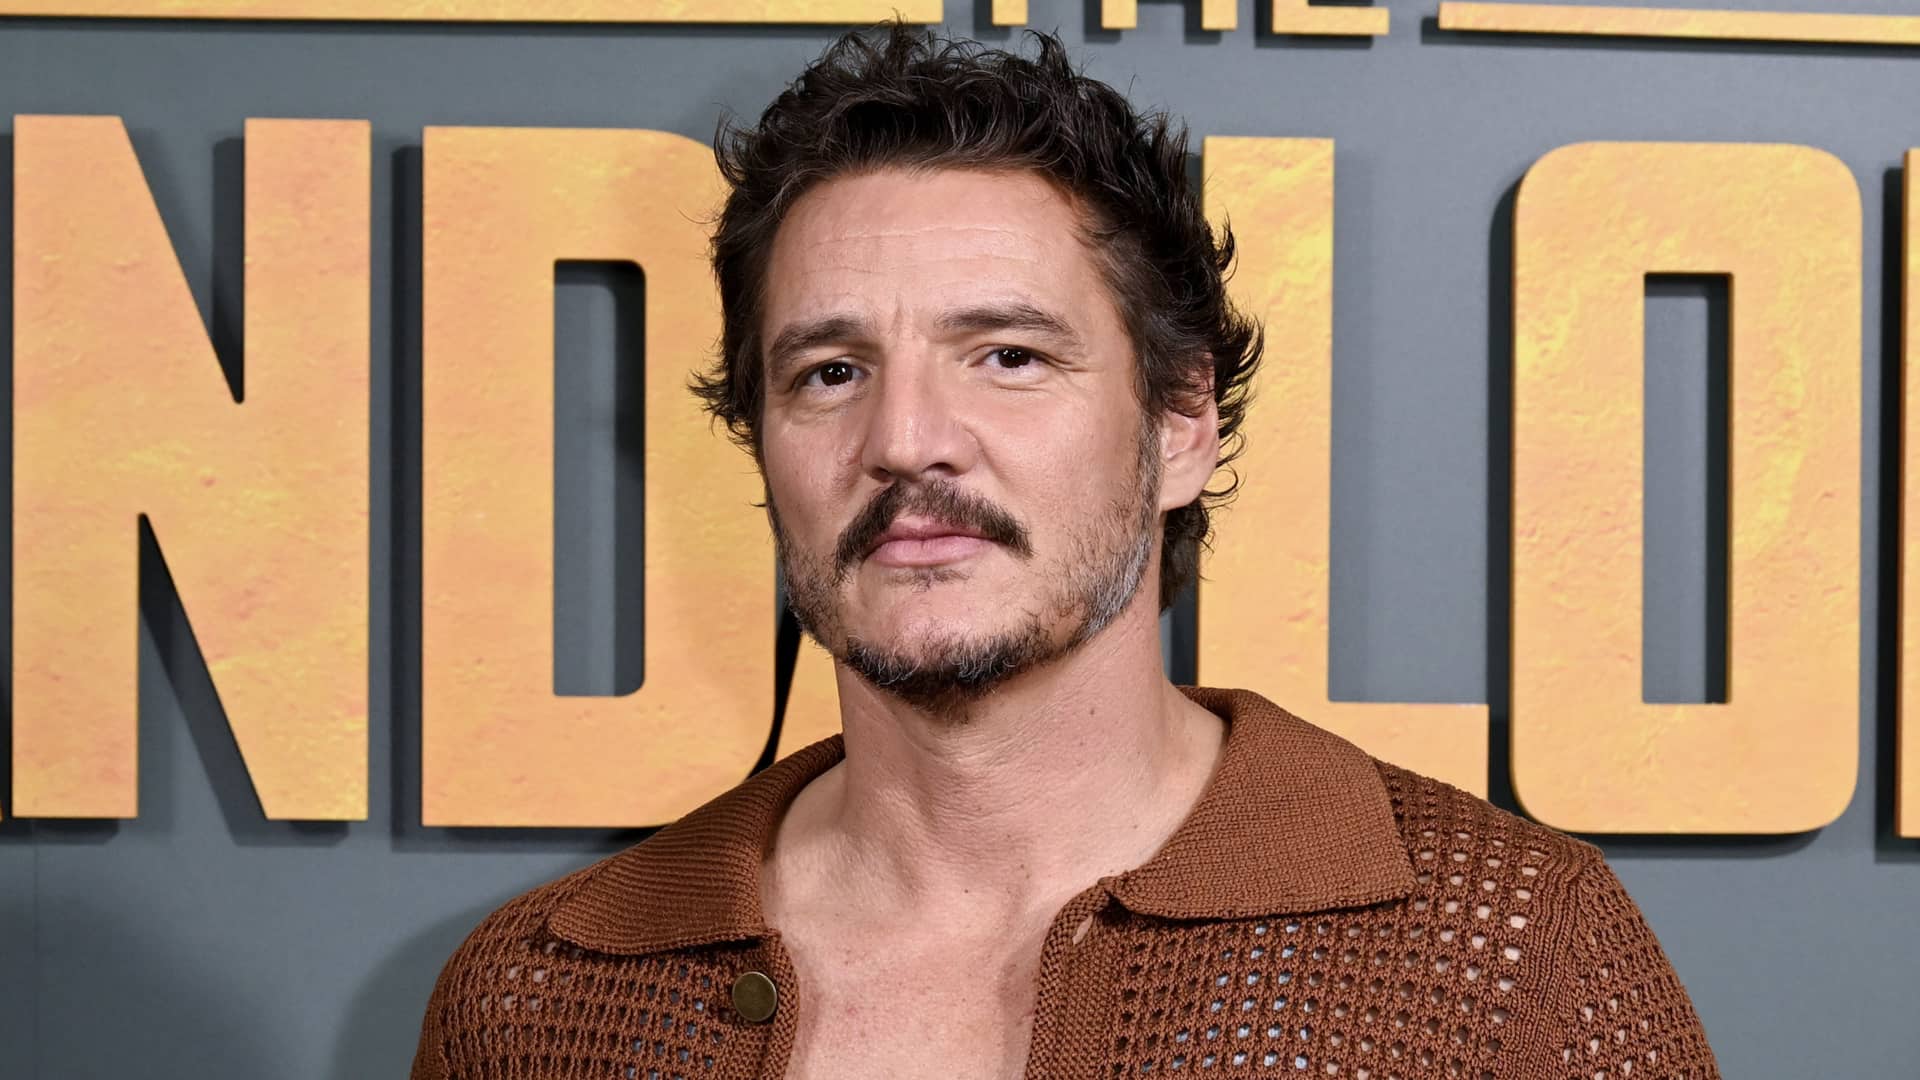 Pedro Pascal is set to star in 'Gladiator' sequel: Report